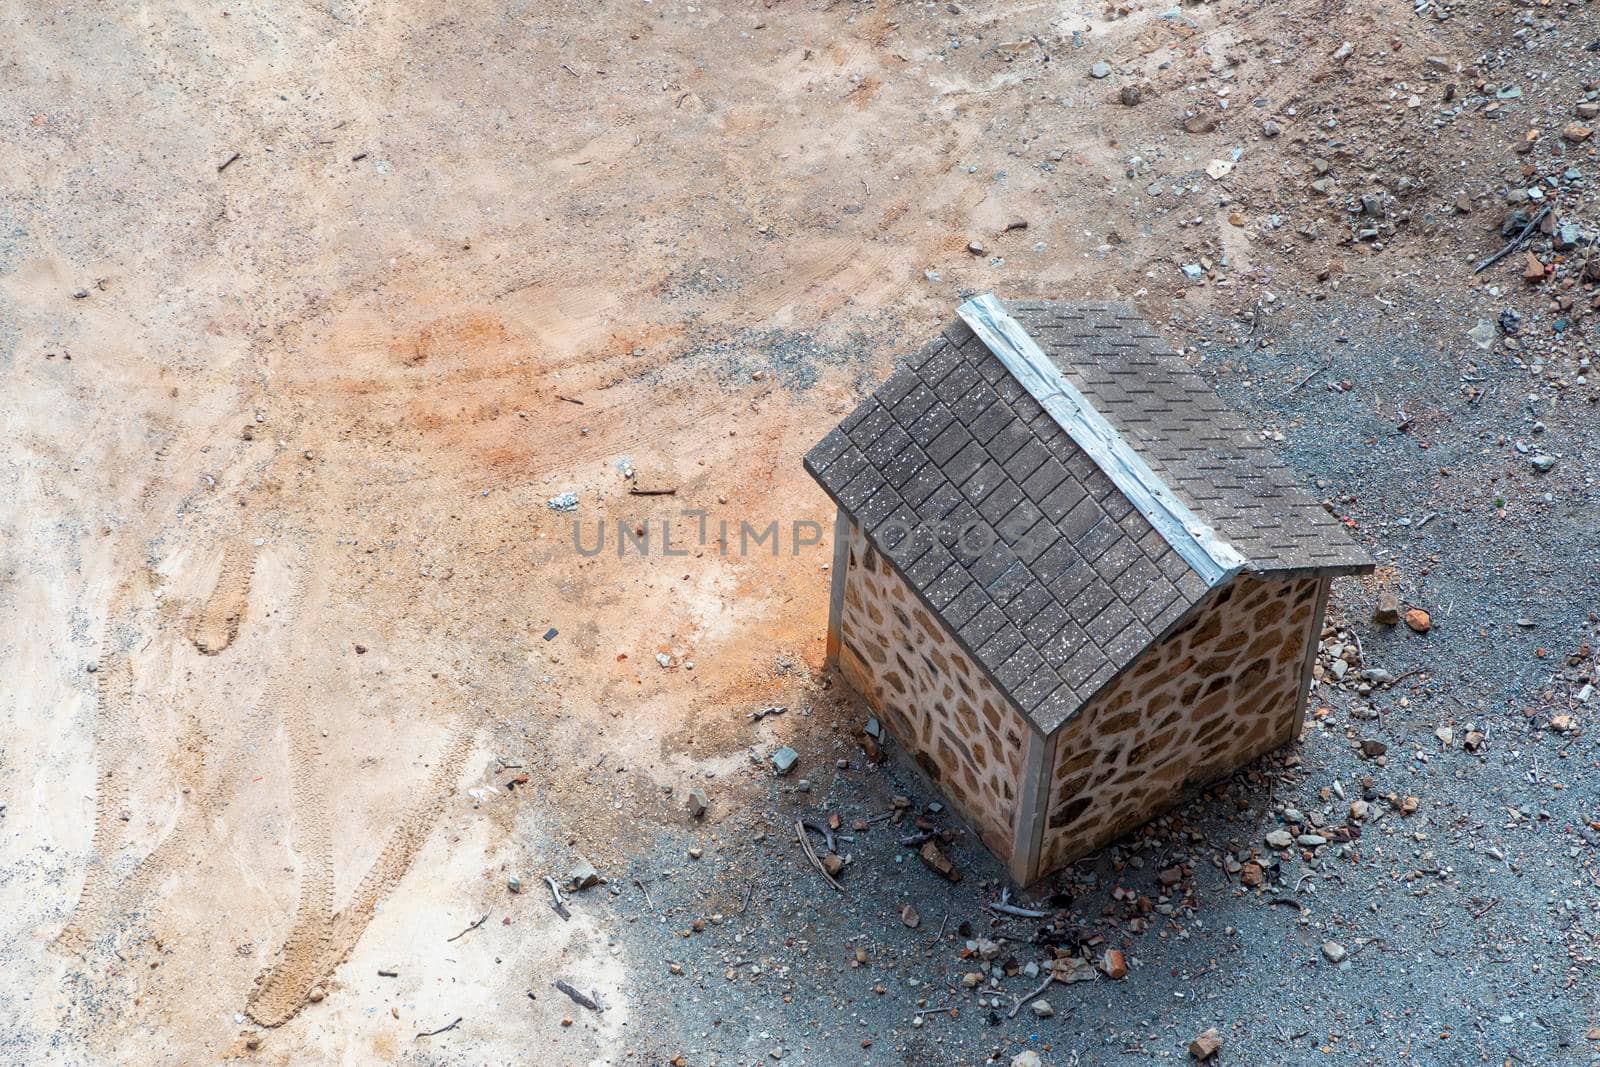 A small brown brick building with tiled roof on dry dirt surrounded by rocks